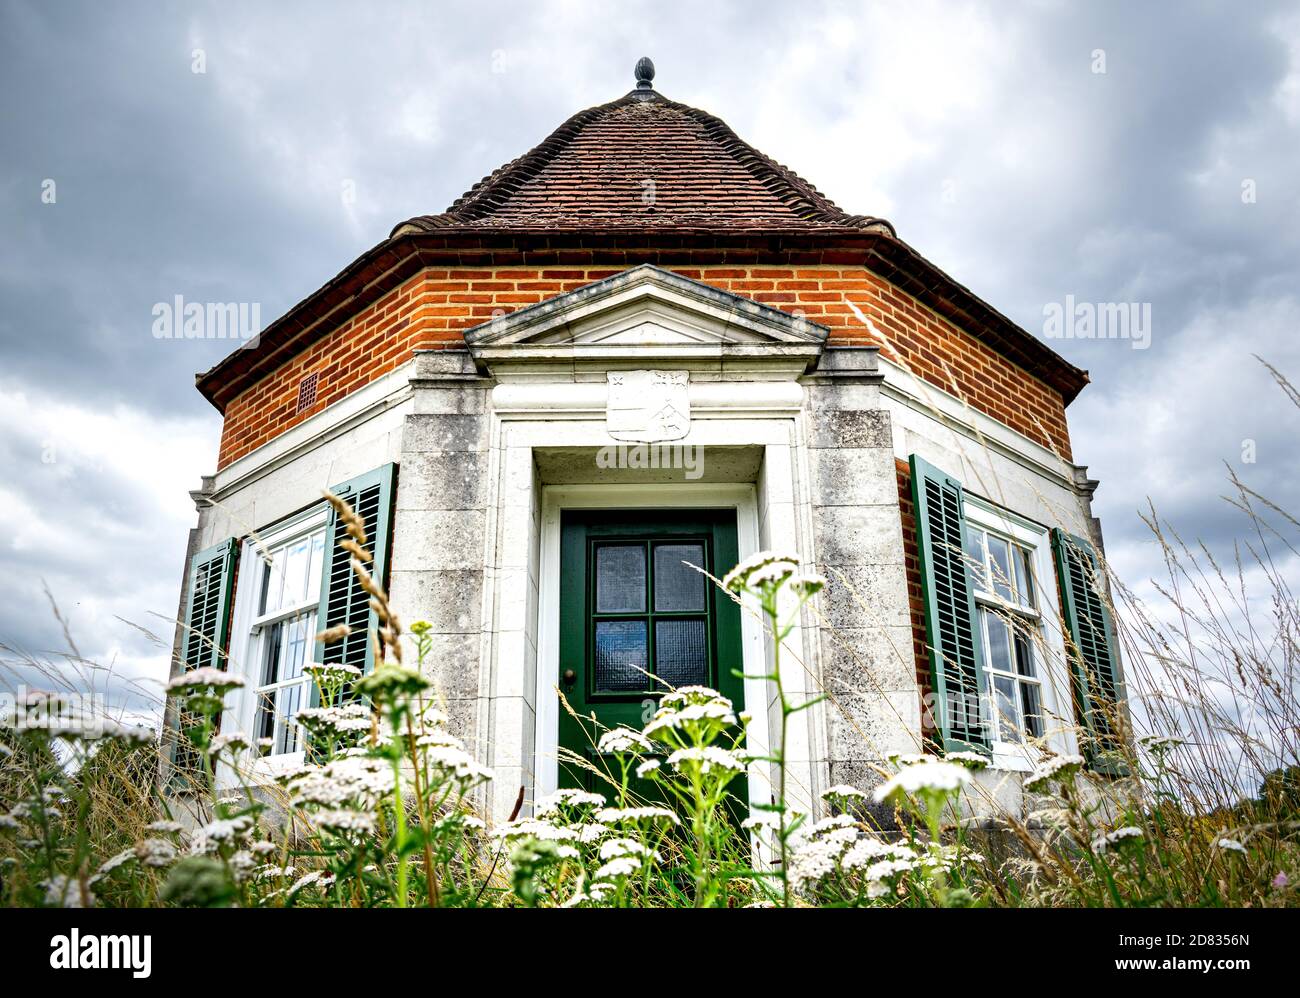 Windsor, United Kingdom - 28 July 2020: One of the Pair of Lutyens Kiosks on the Runnymede meadow, wide angle front view of historic building Stock Photo